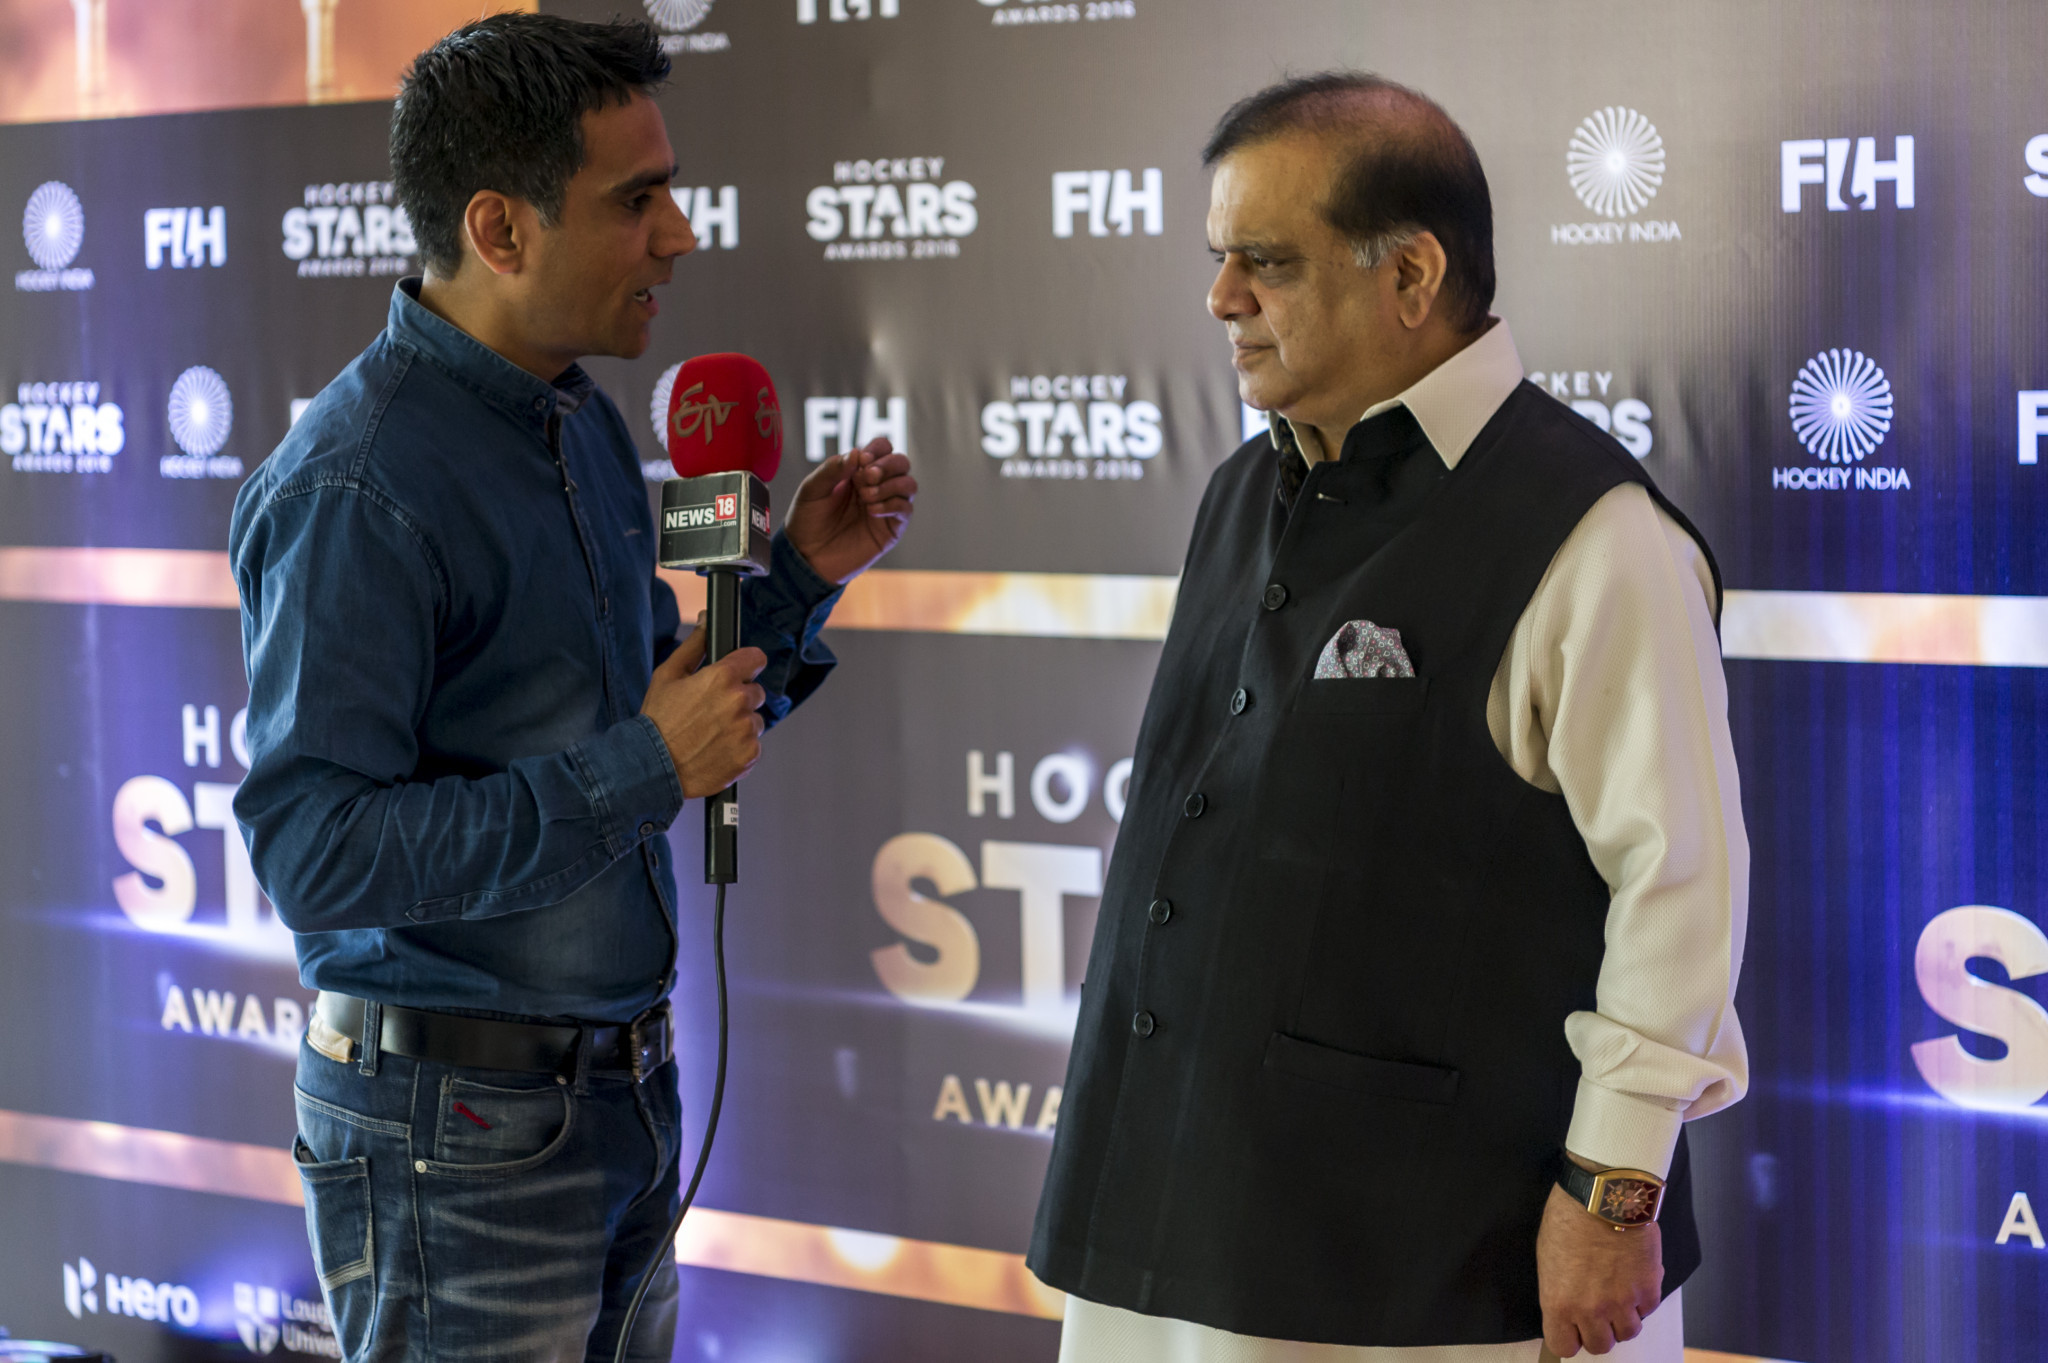 Indian Olympic Association President Narinder Batra warned there is no point in the nation's shooters taking part in a Commonwealth Shooting Championships if the medals are not counted in India's tally for Birmingham 2022 ©Getty Images